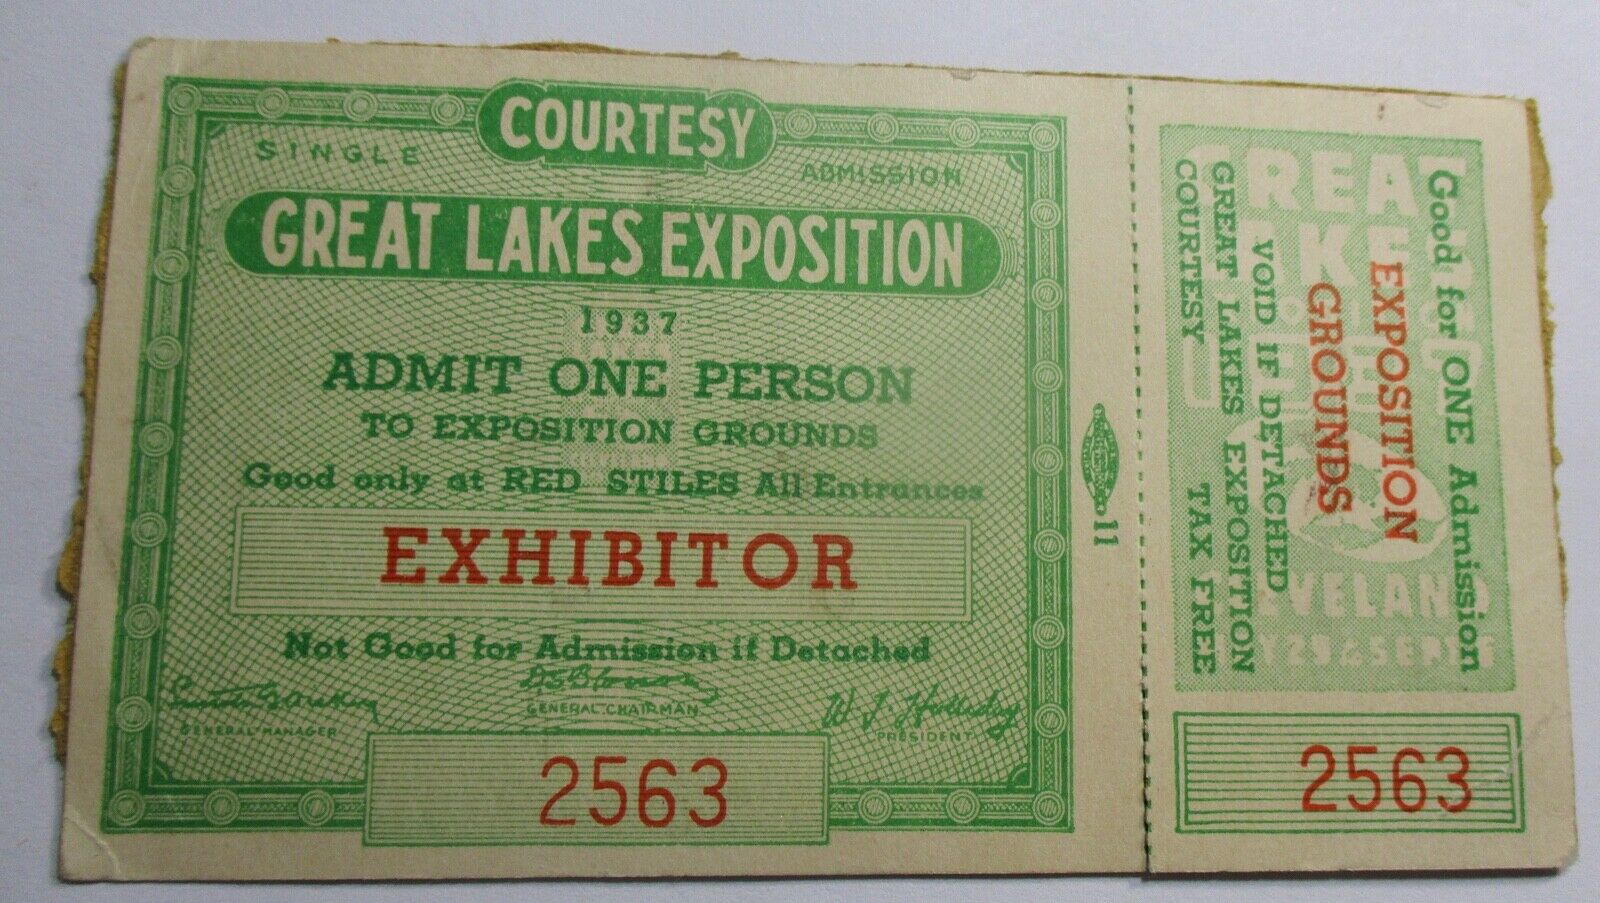 VERY SCARCE EXHIBITOR PASS WITH STUB, UNUSED WORLD\'S FAIR GREAT LAKES EXPO 1937